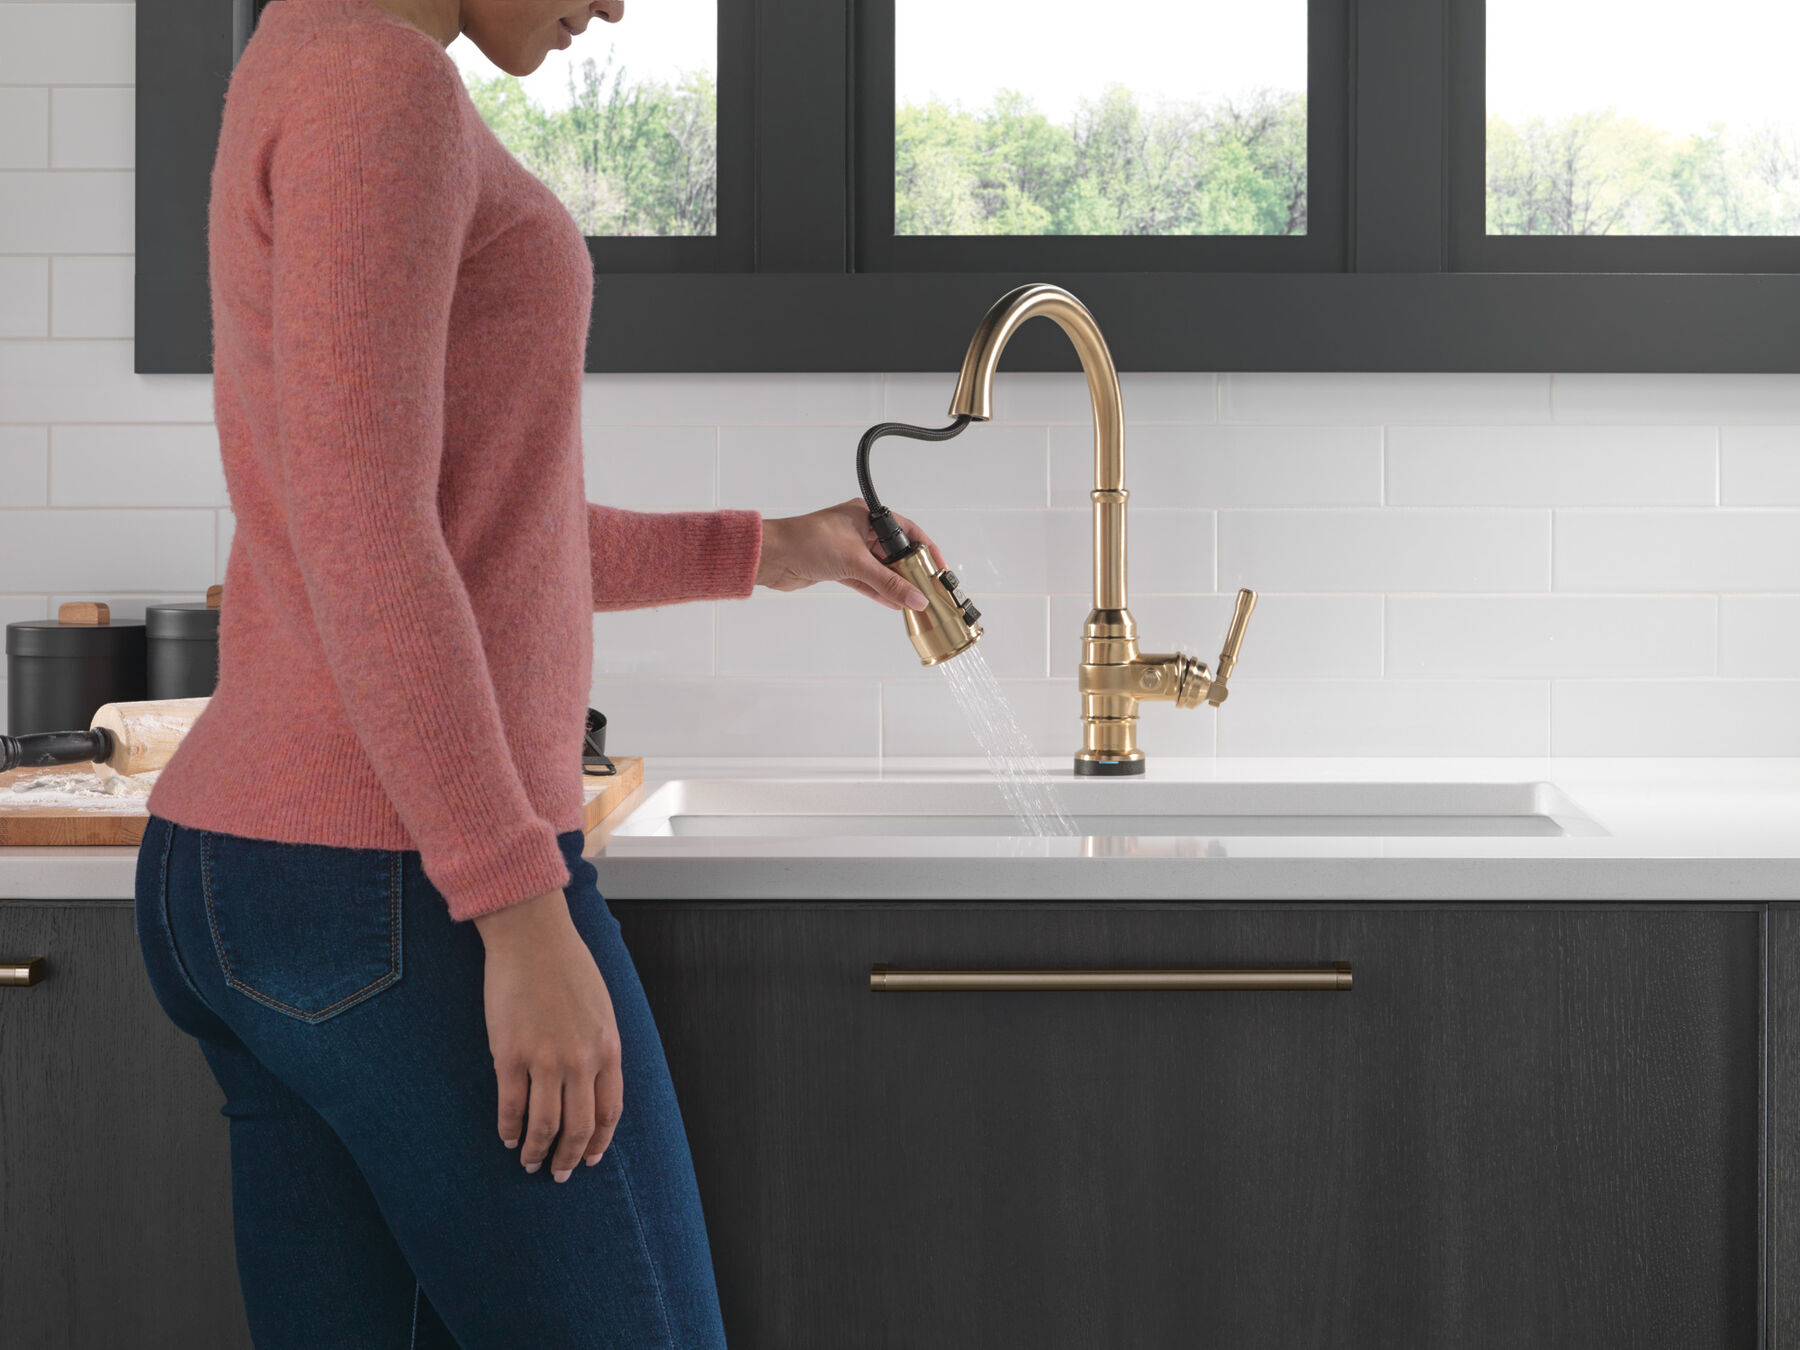 Led Kitchen Sink Faucet with Pull Down Sprayer Brass Single Handle